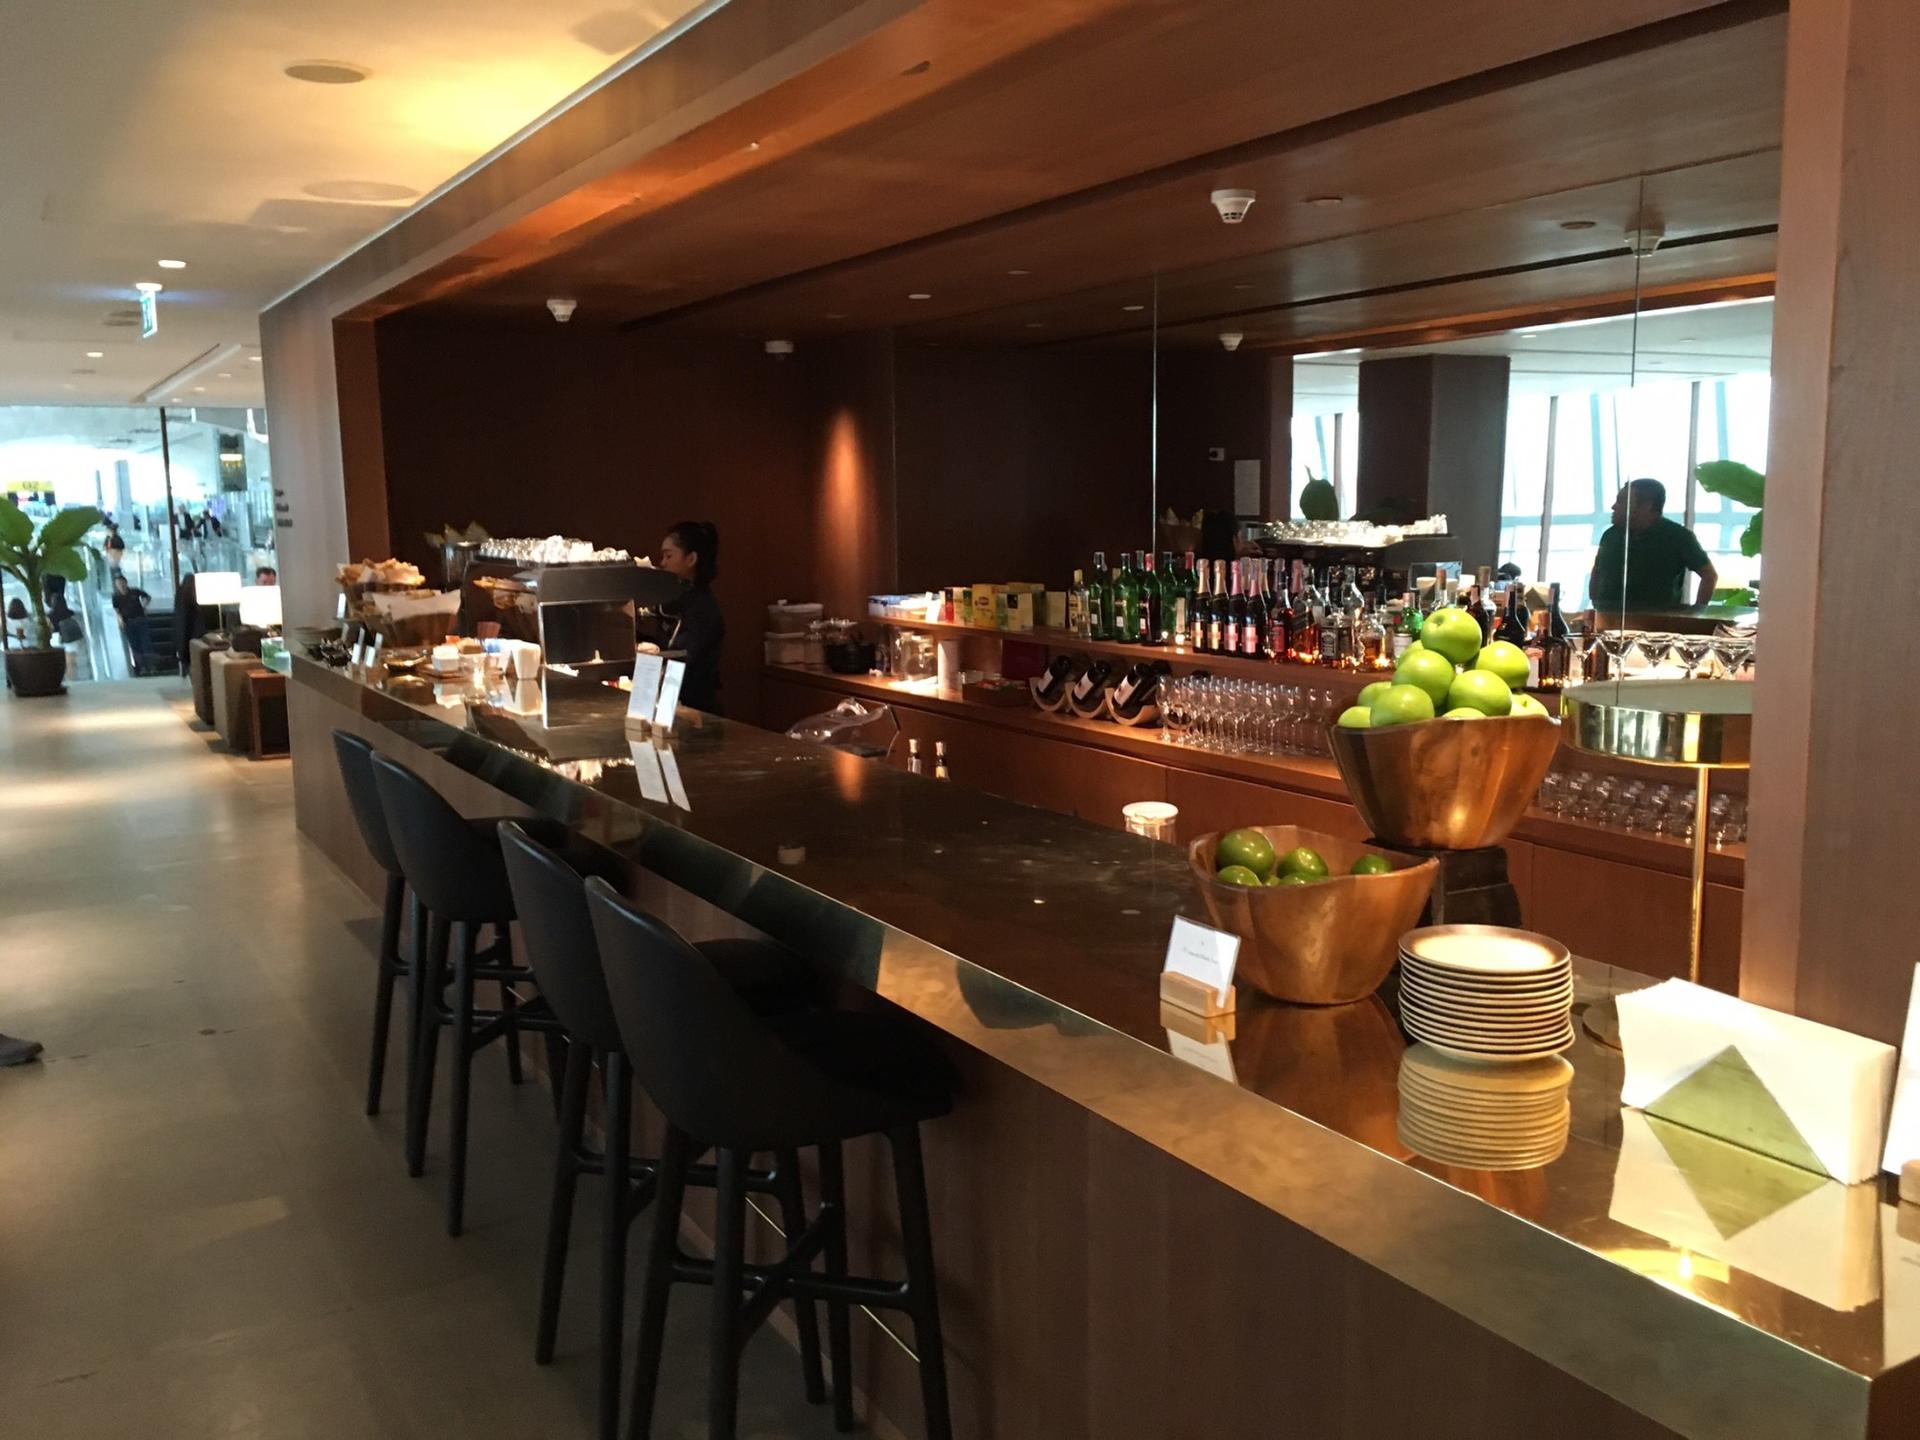 Cathay Pacific First and Business Class Lounge image 52 of 69